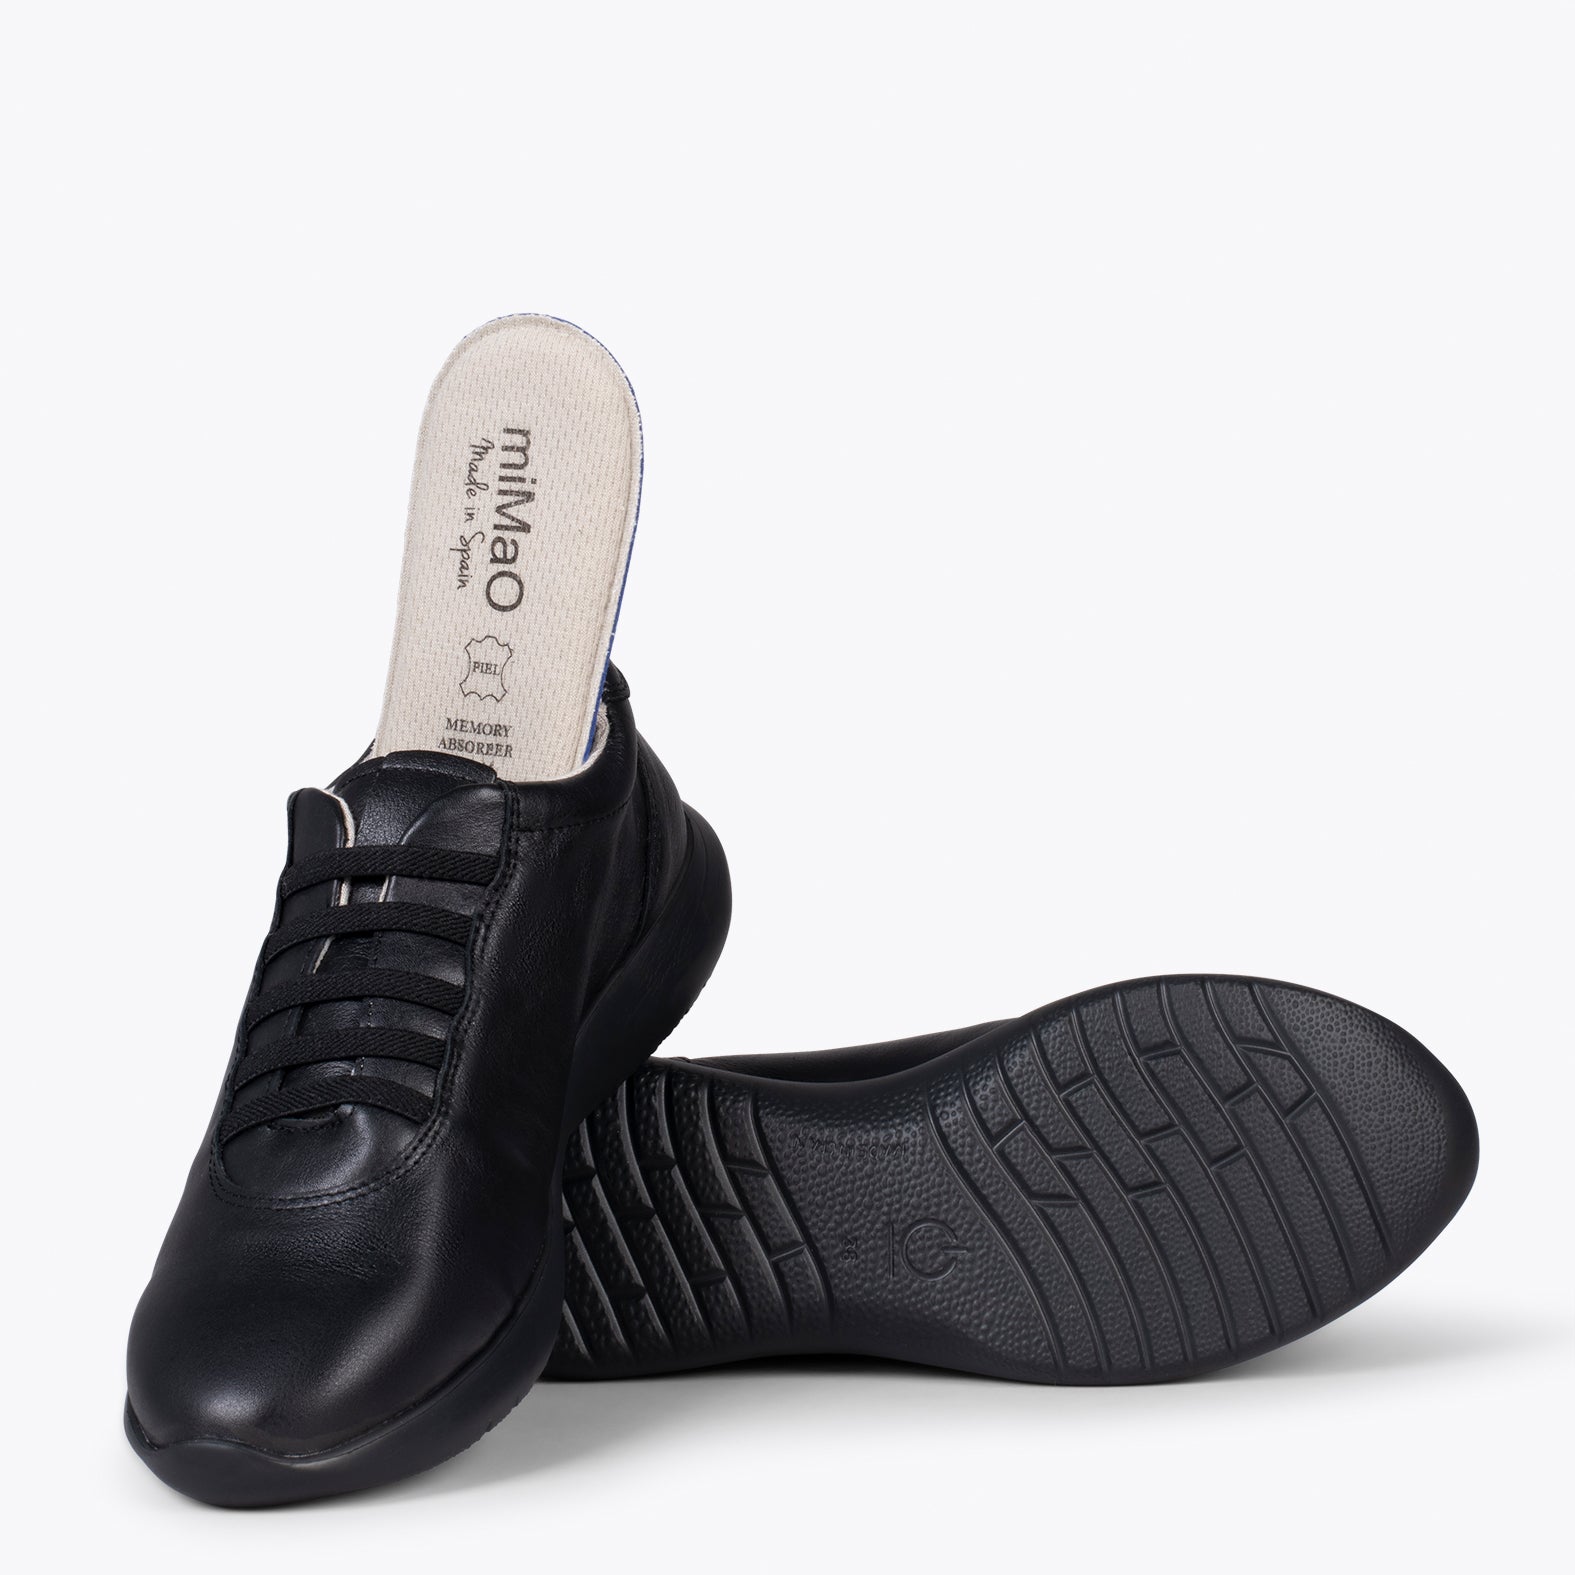 CHICAGO – TOTAL BLACK sneakers with elastic laces